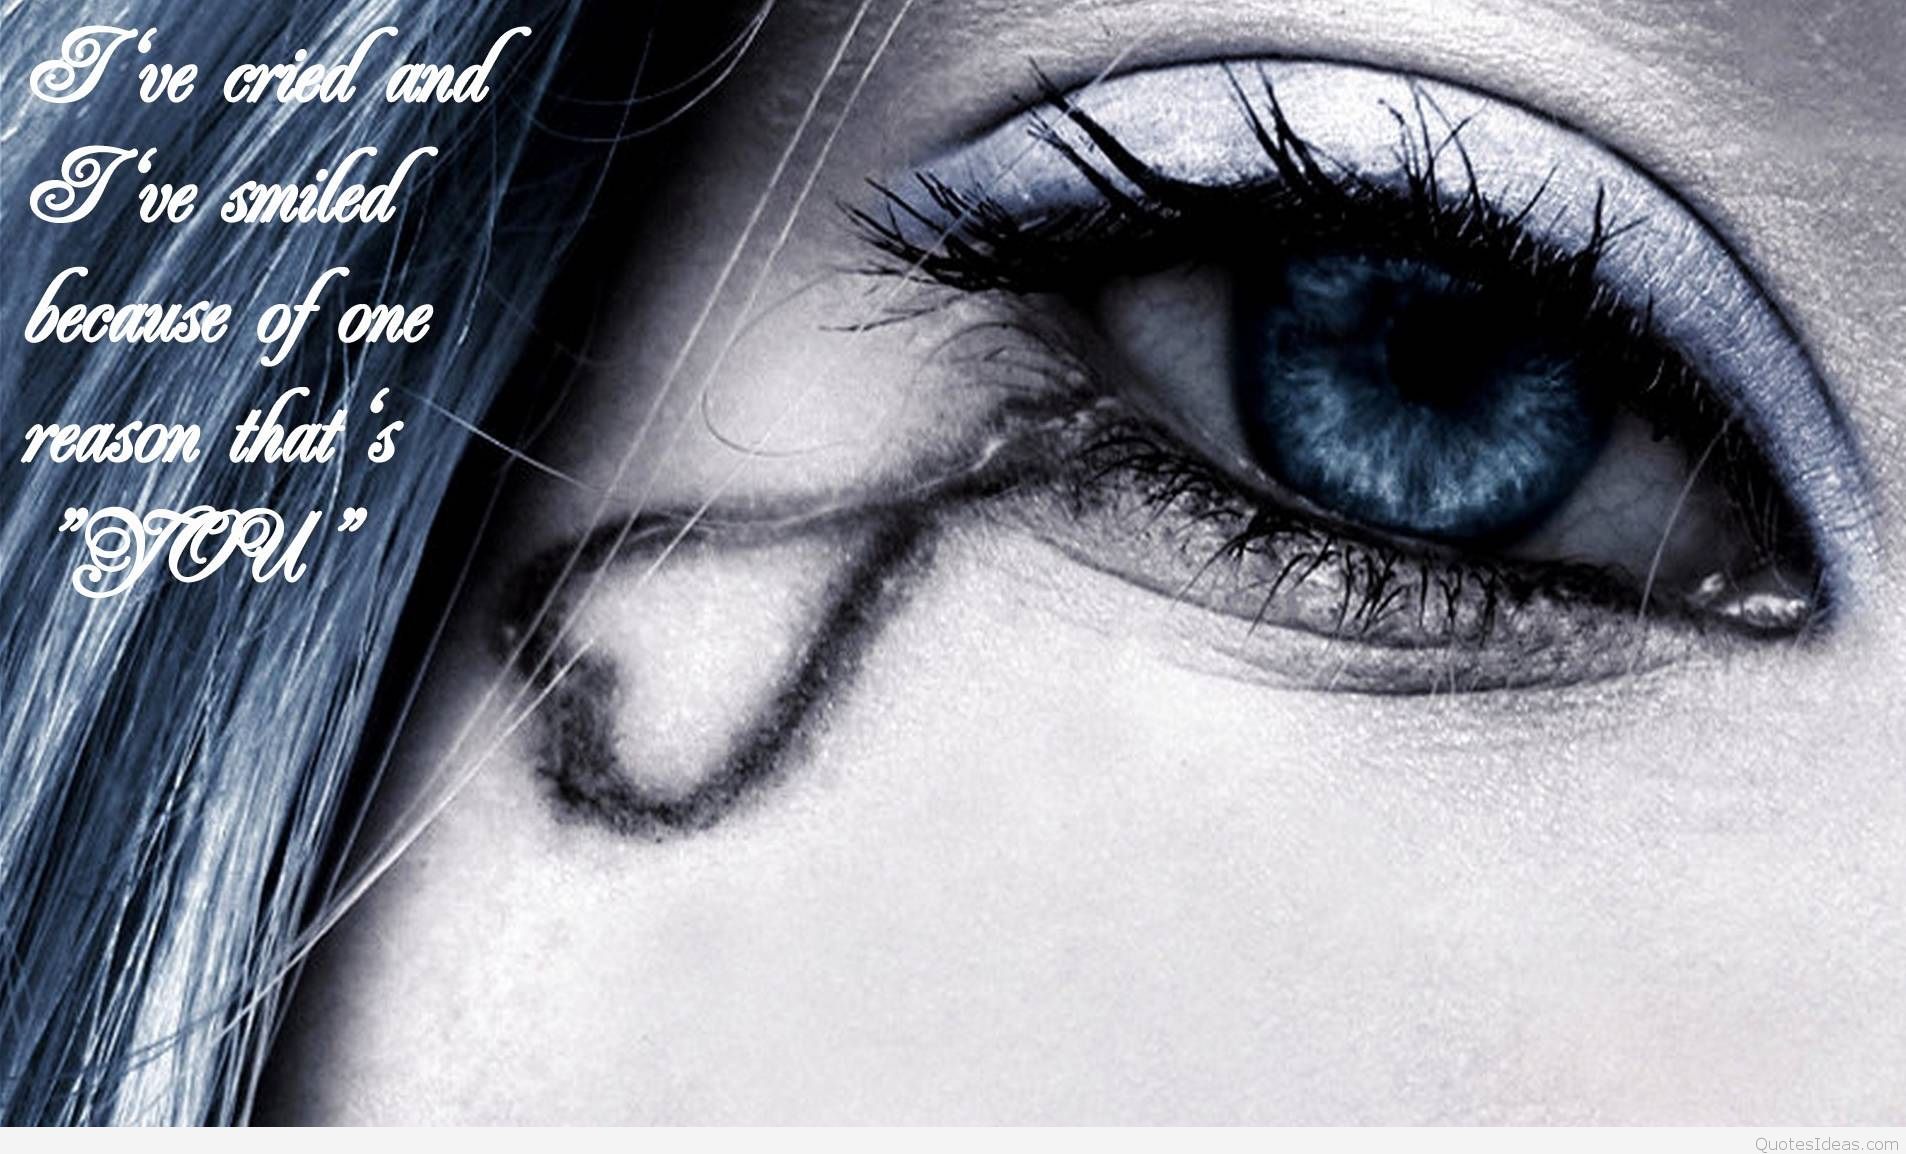 Sad Love Quotes Wallpapers Free Download For Pc - Some Sad Images Of Love -  1906x1154 Wallpaper 